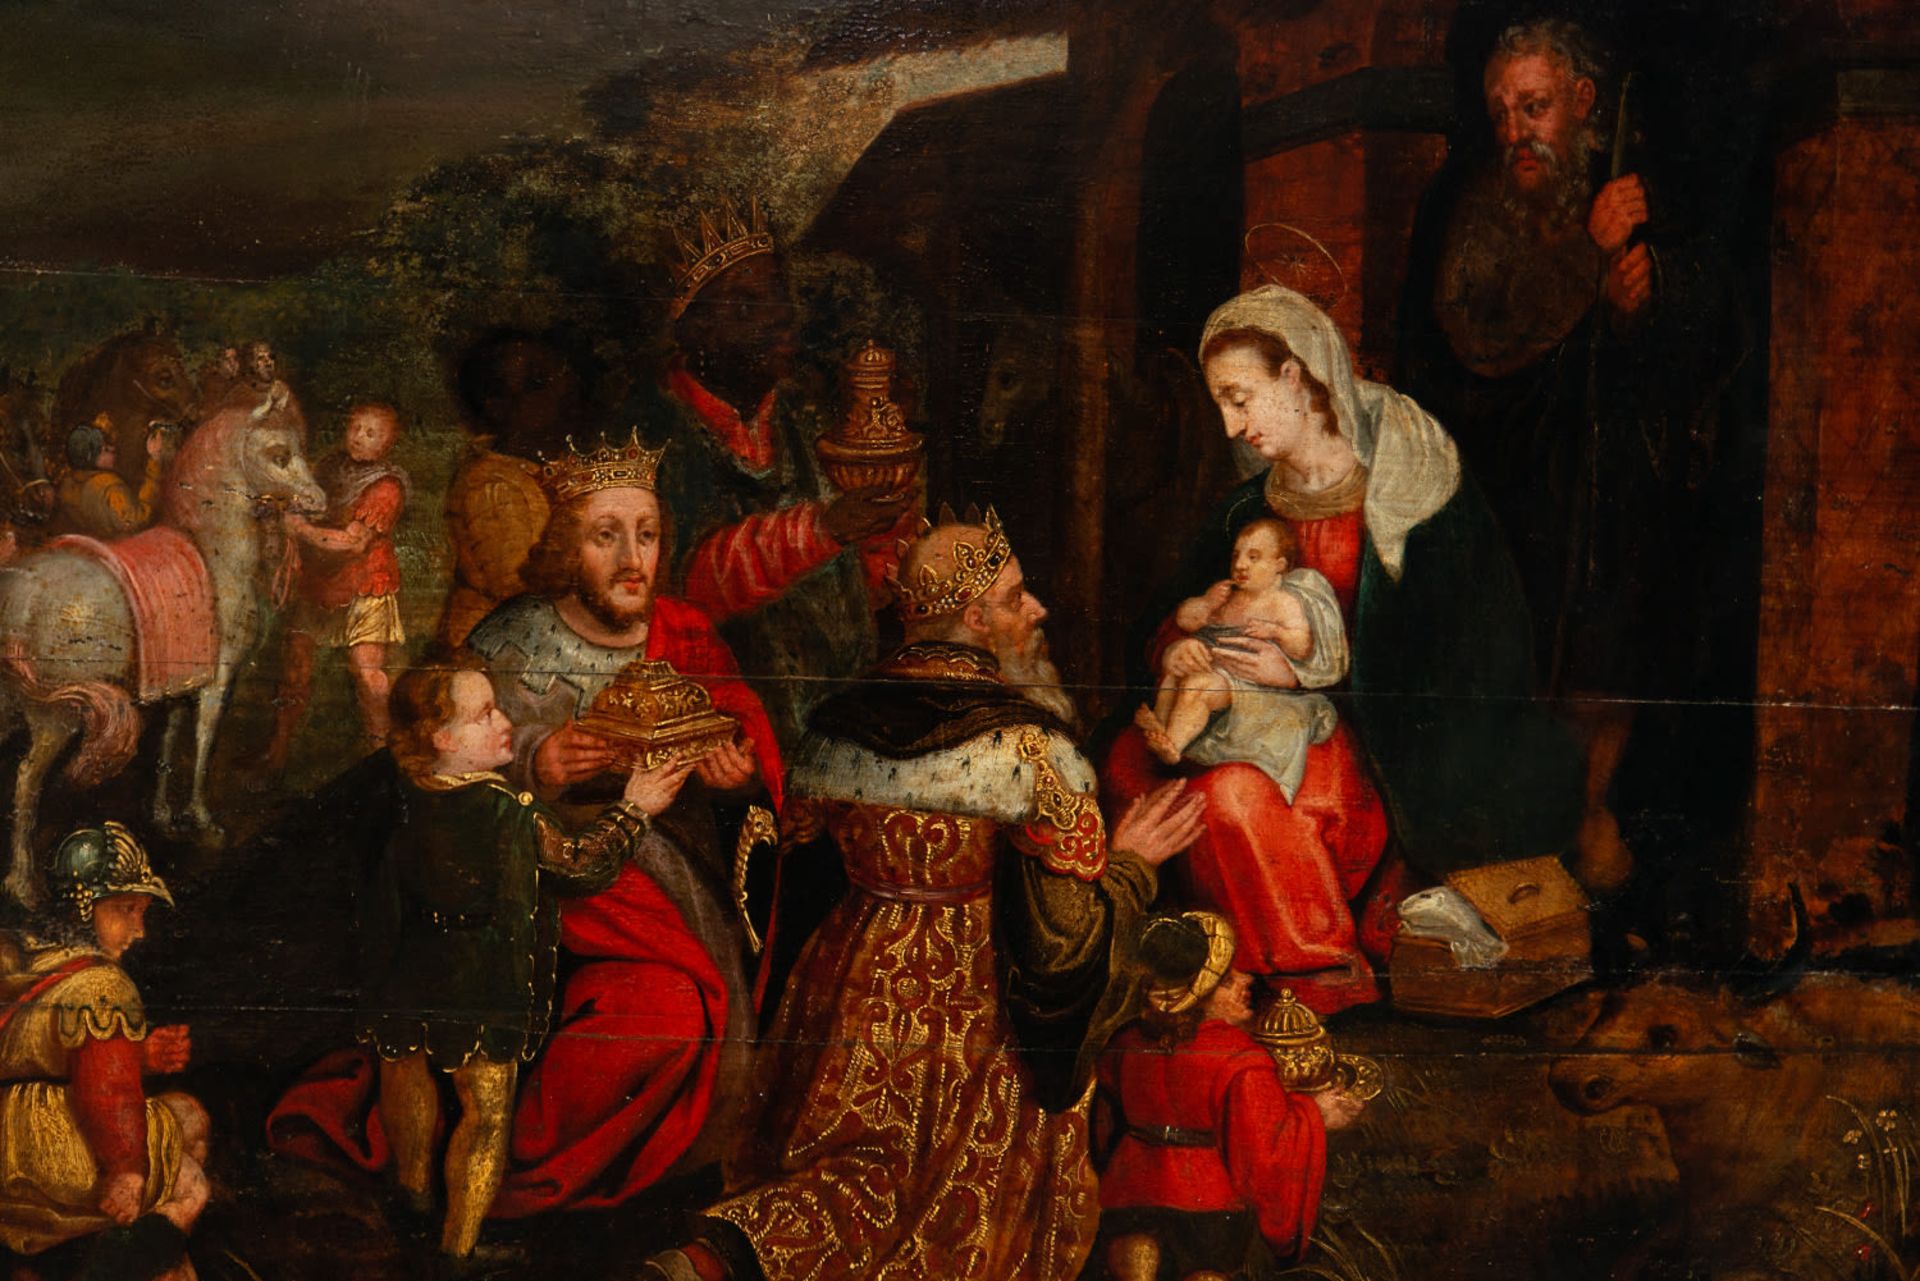 Adoration of the Magi, Flemish school of the 16th century - Image 2 of 5